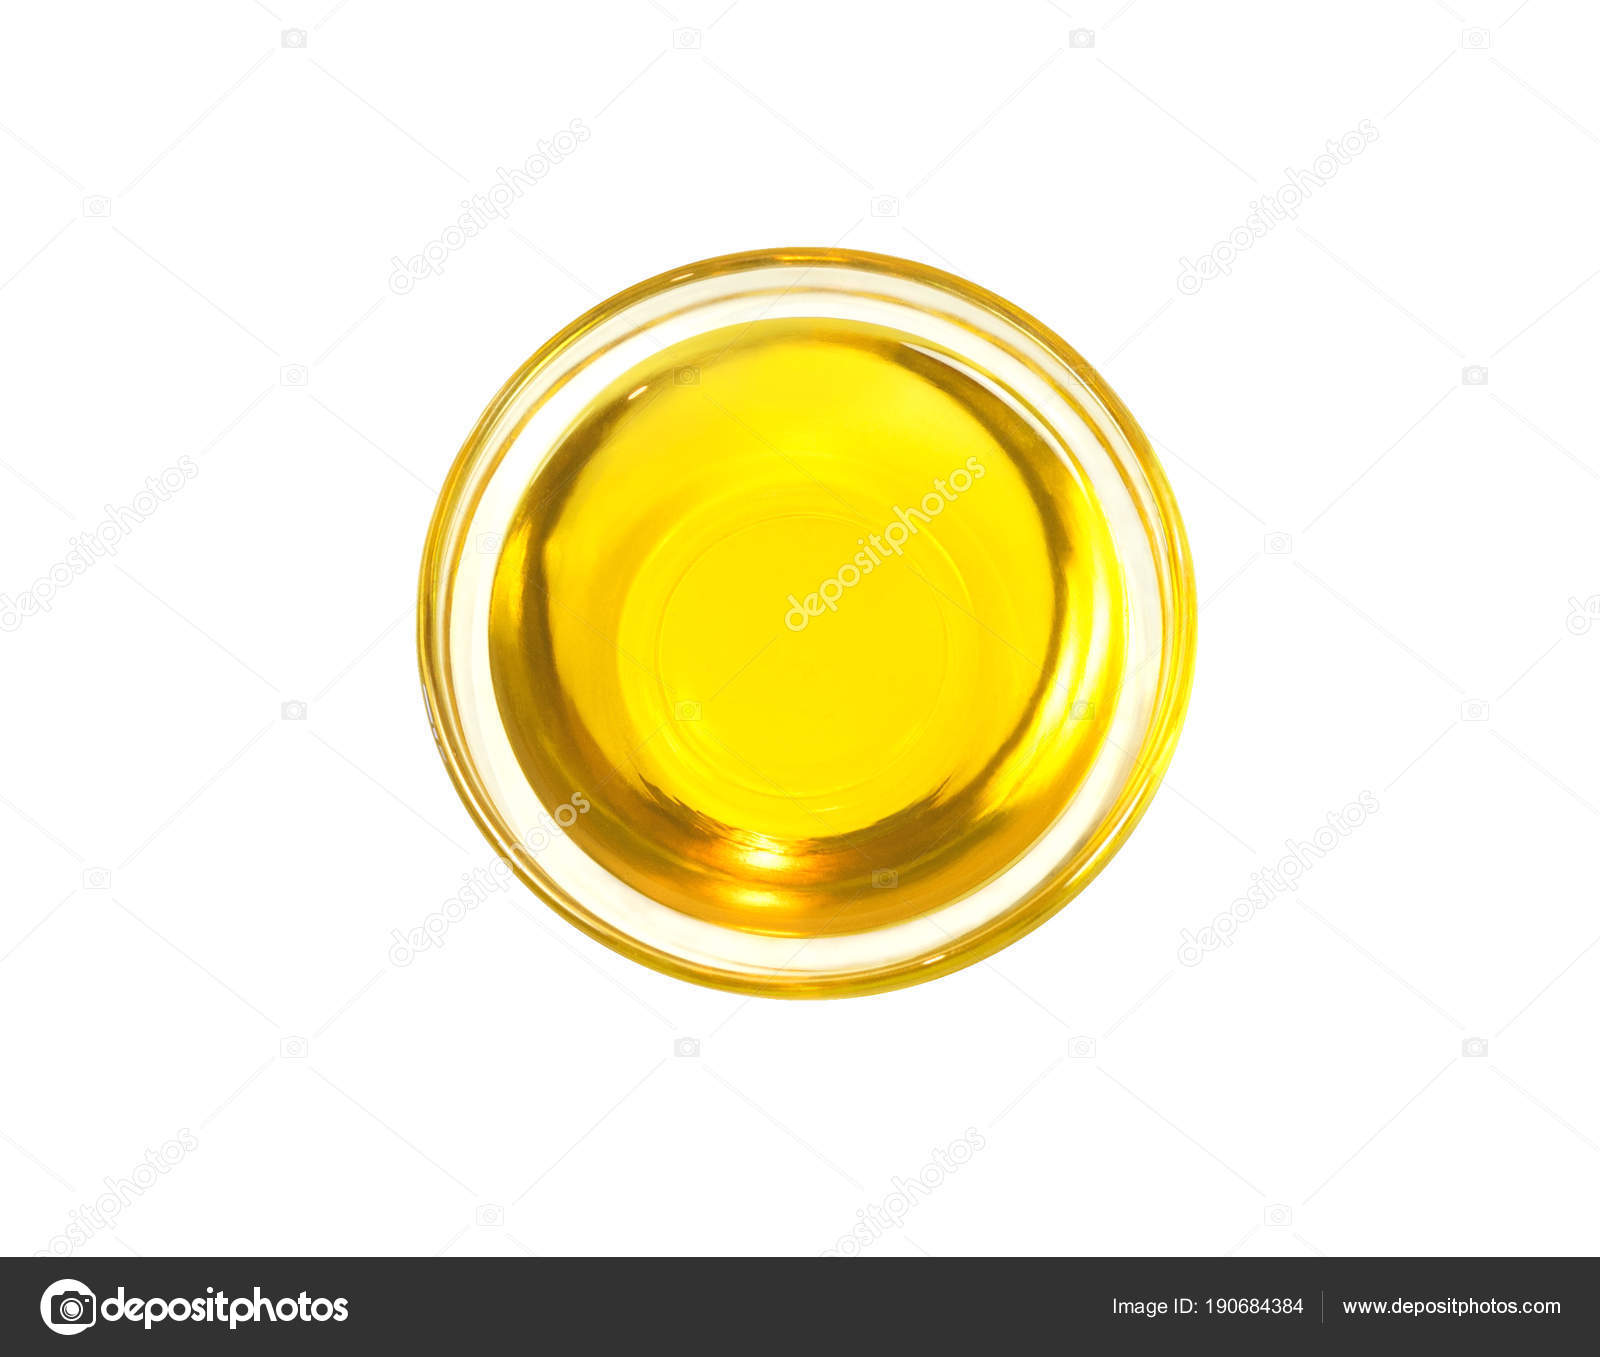 Download Top View Olive Sunflower Yellow Oil Glass Bowl Isolated White Stock Photo C Lilkin 190684384 Yellowimages Mockups